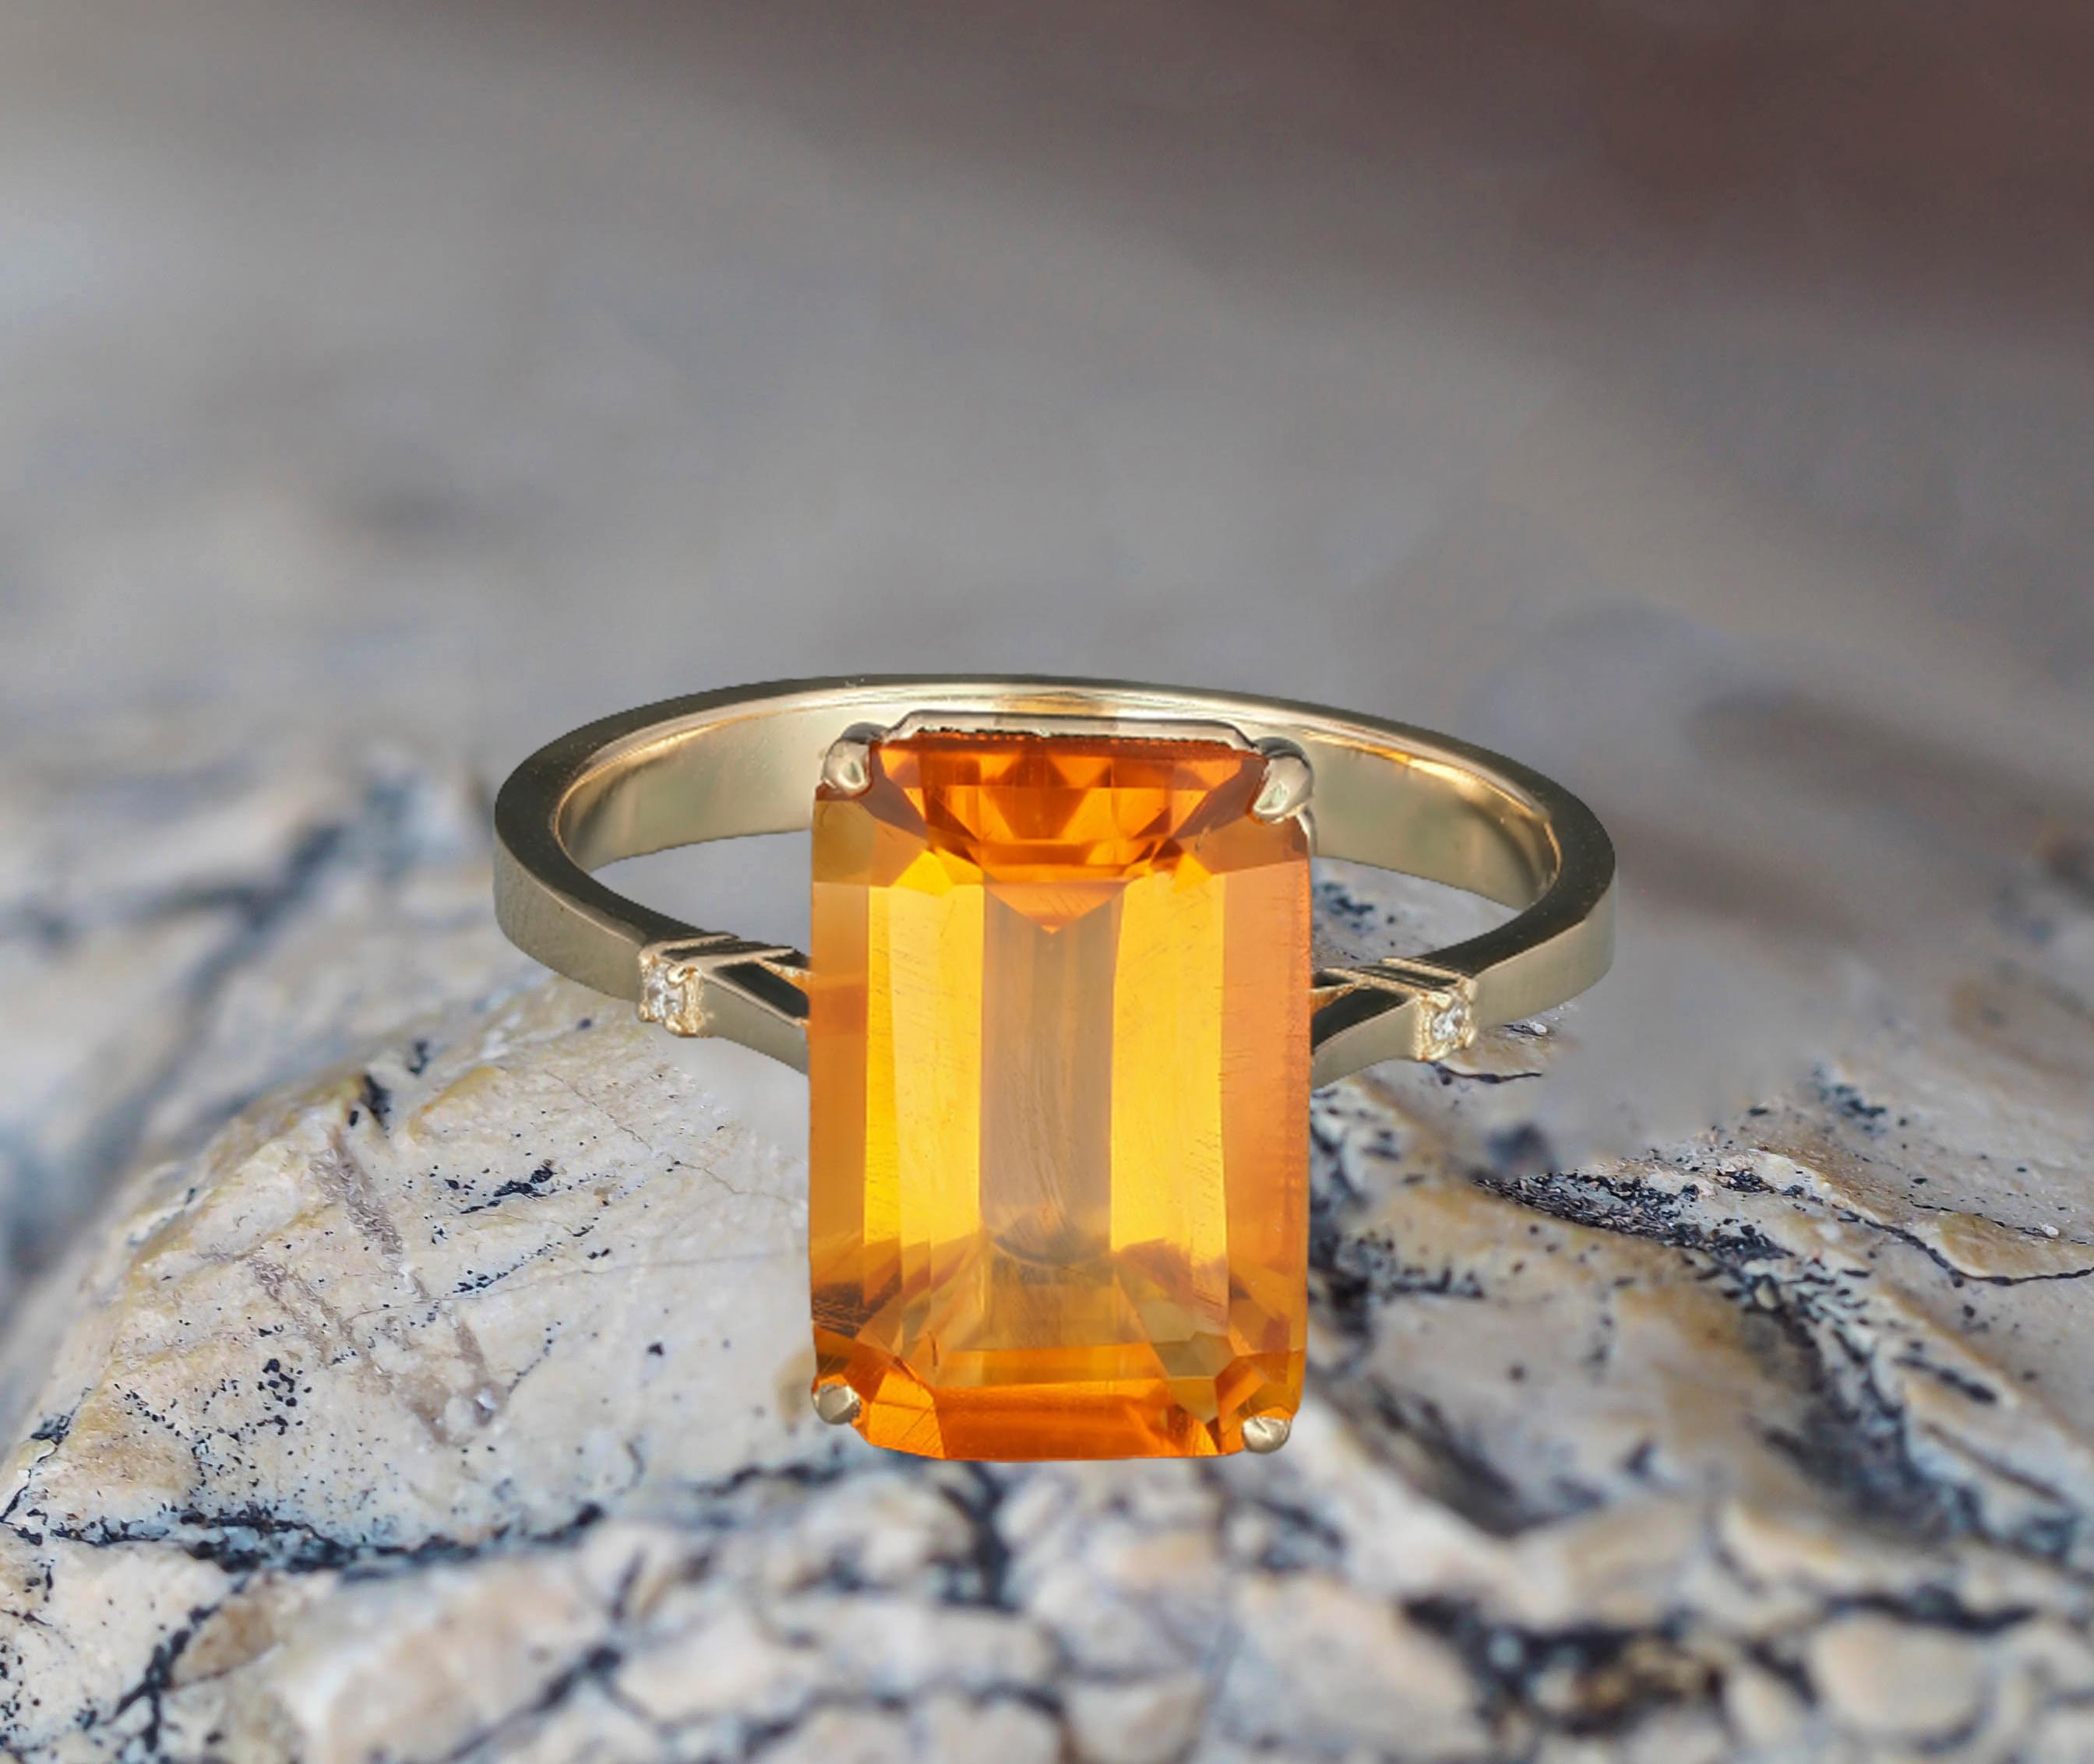 Citrine solitaire 14k gold ring. 

Yellow citrine ring. November birthstone ring. Emerald cut citrine ring. Vintage citrine ring.

Metal: 14k gold
Weight: 2.85 g. depends from size.

Set with citrine, color - yellow
Emerald cut, aprox 3 ct. in total